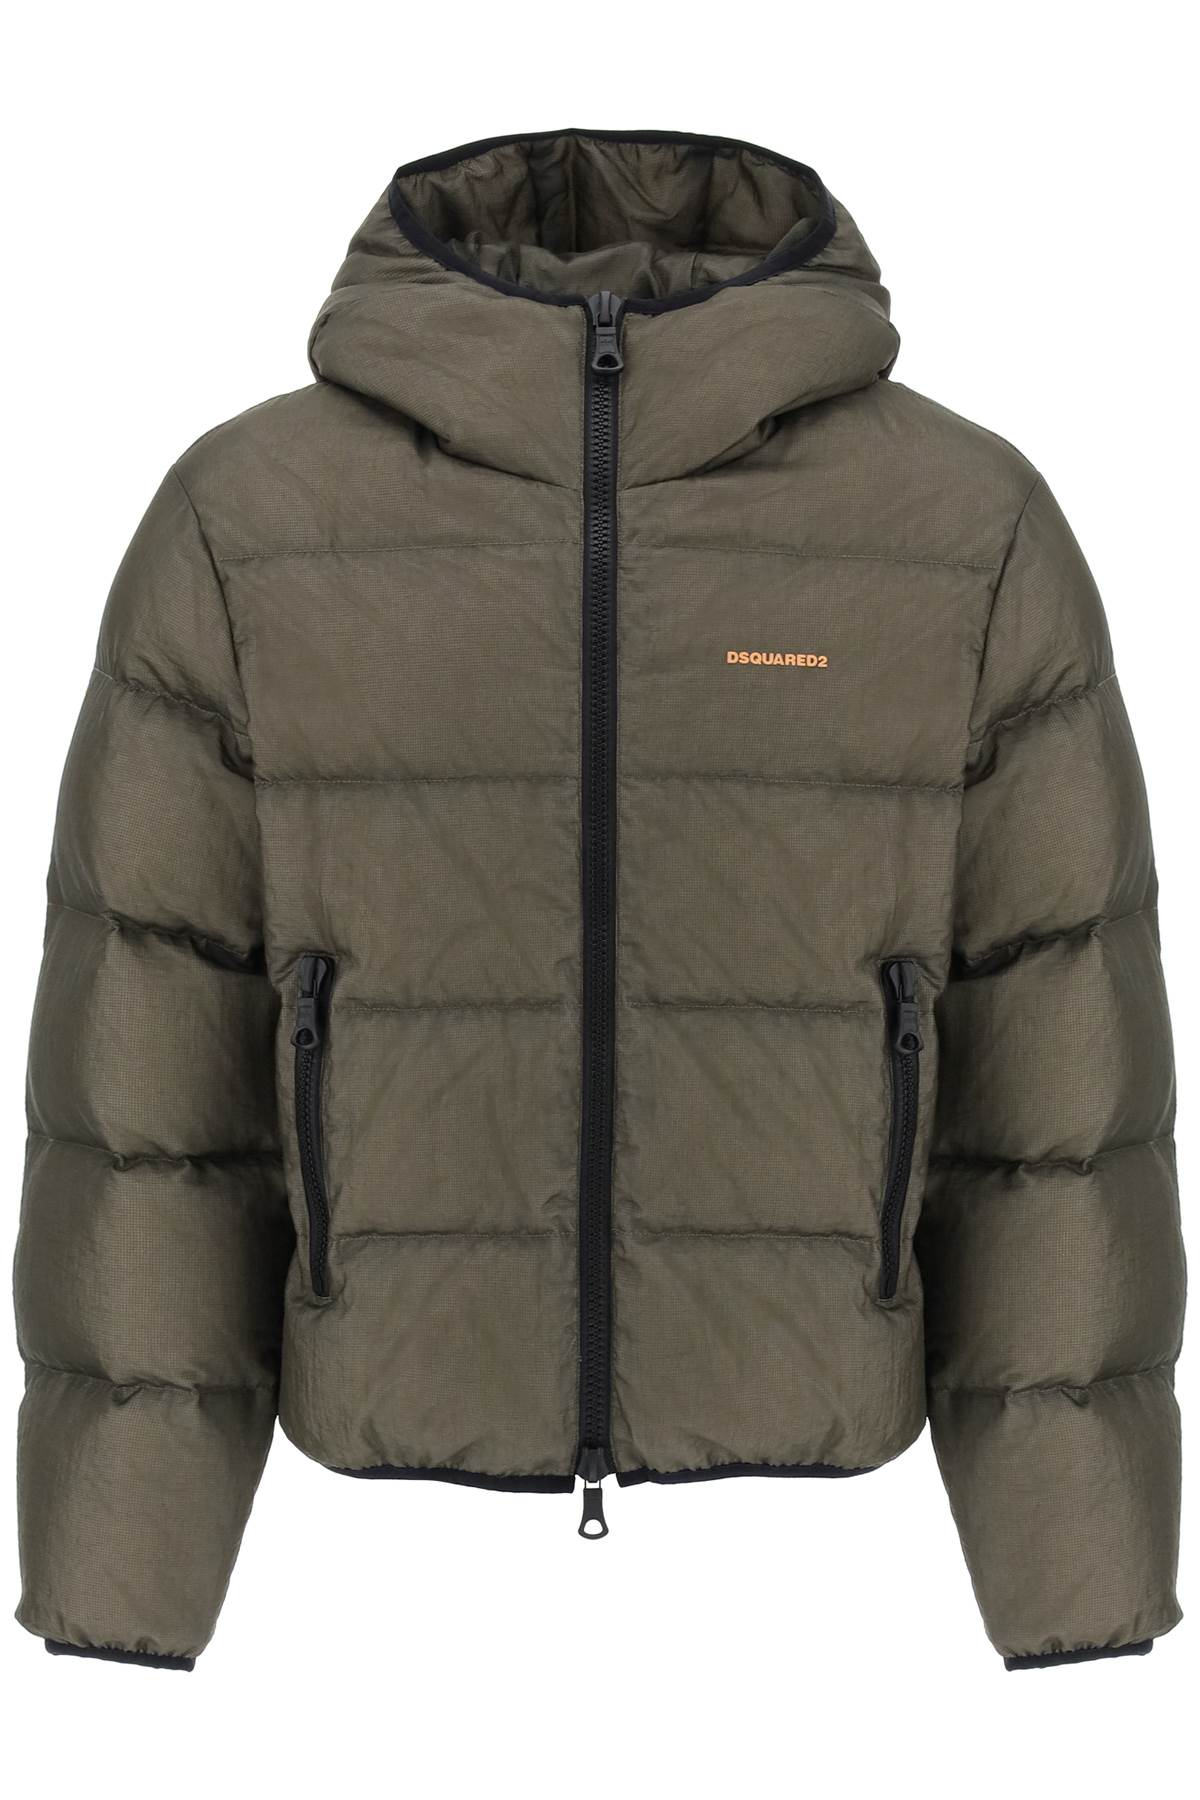 DSQUARED2 Green Ripstop Puffer Jacket for Men - Quilted Nylon, 90/10 Duck Down and Feathers